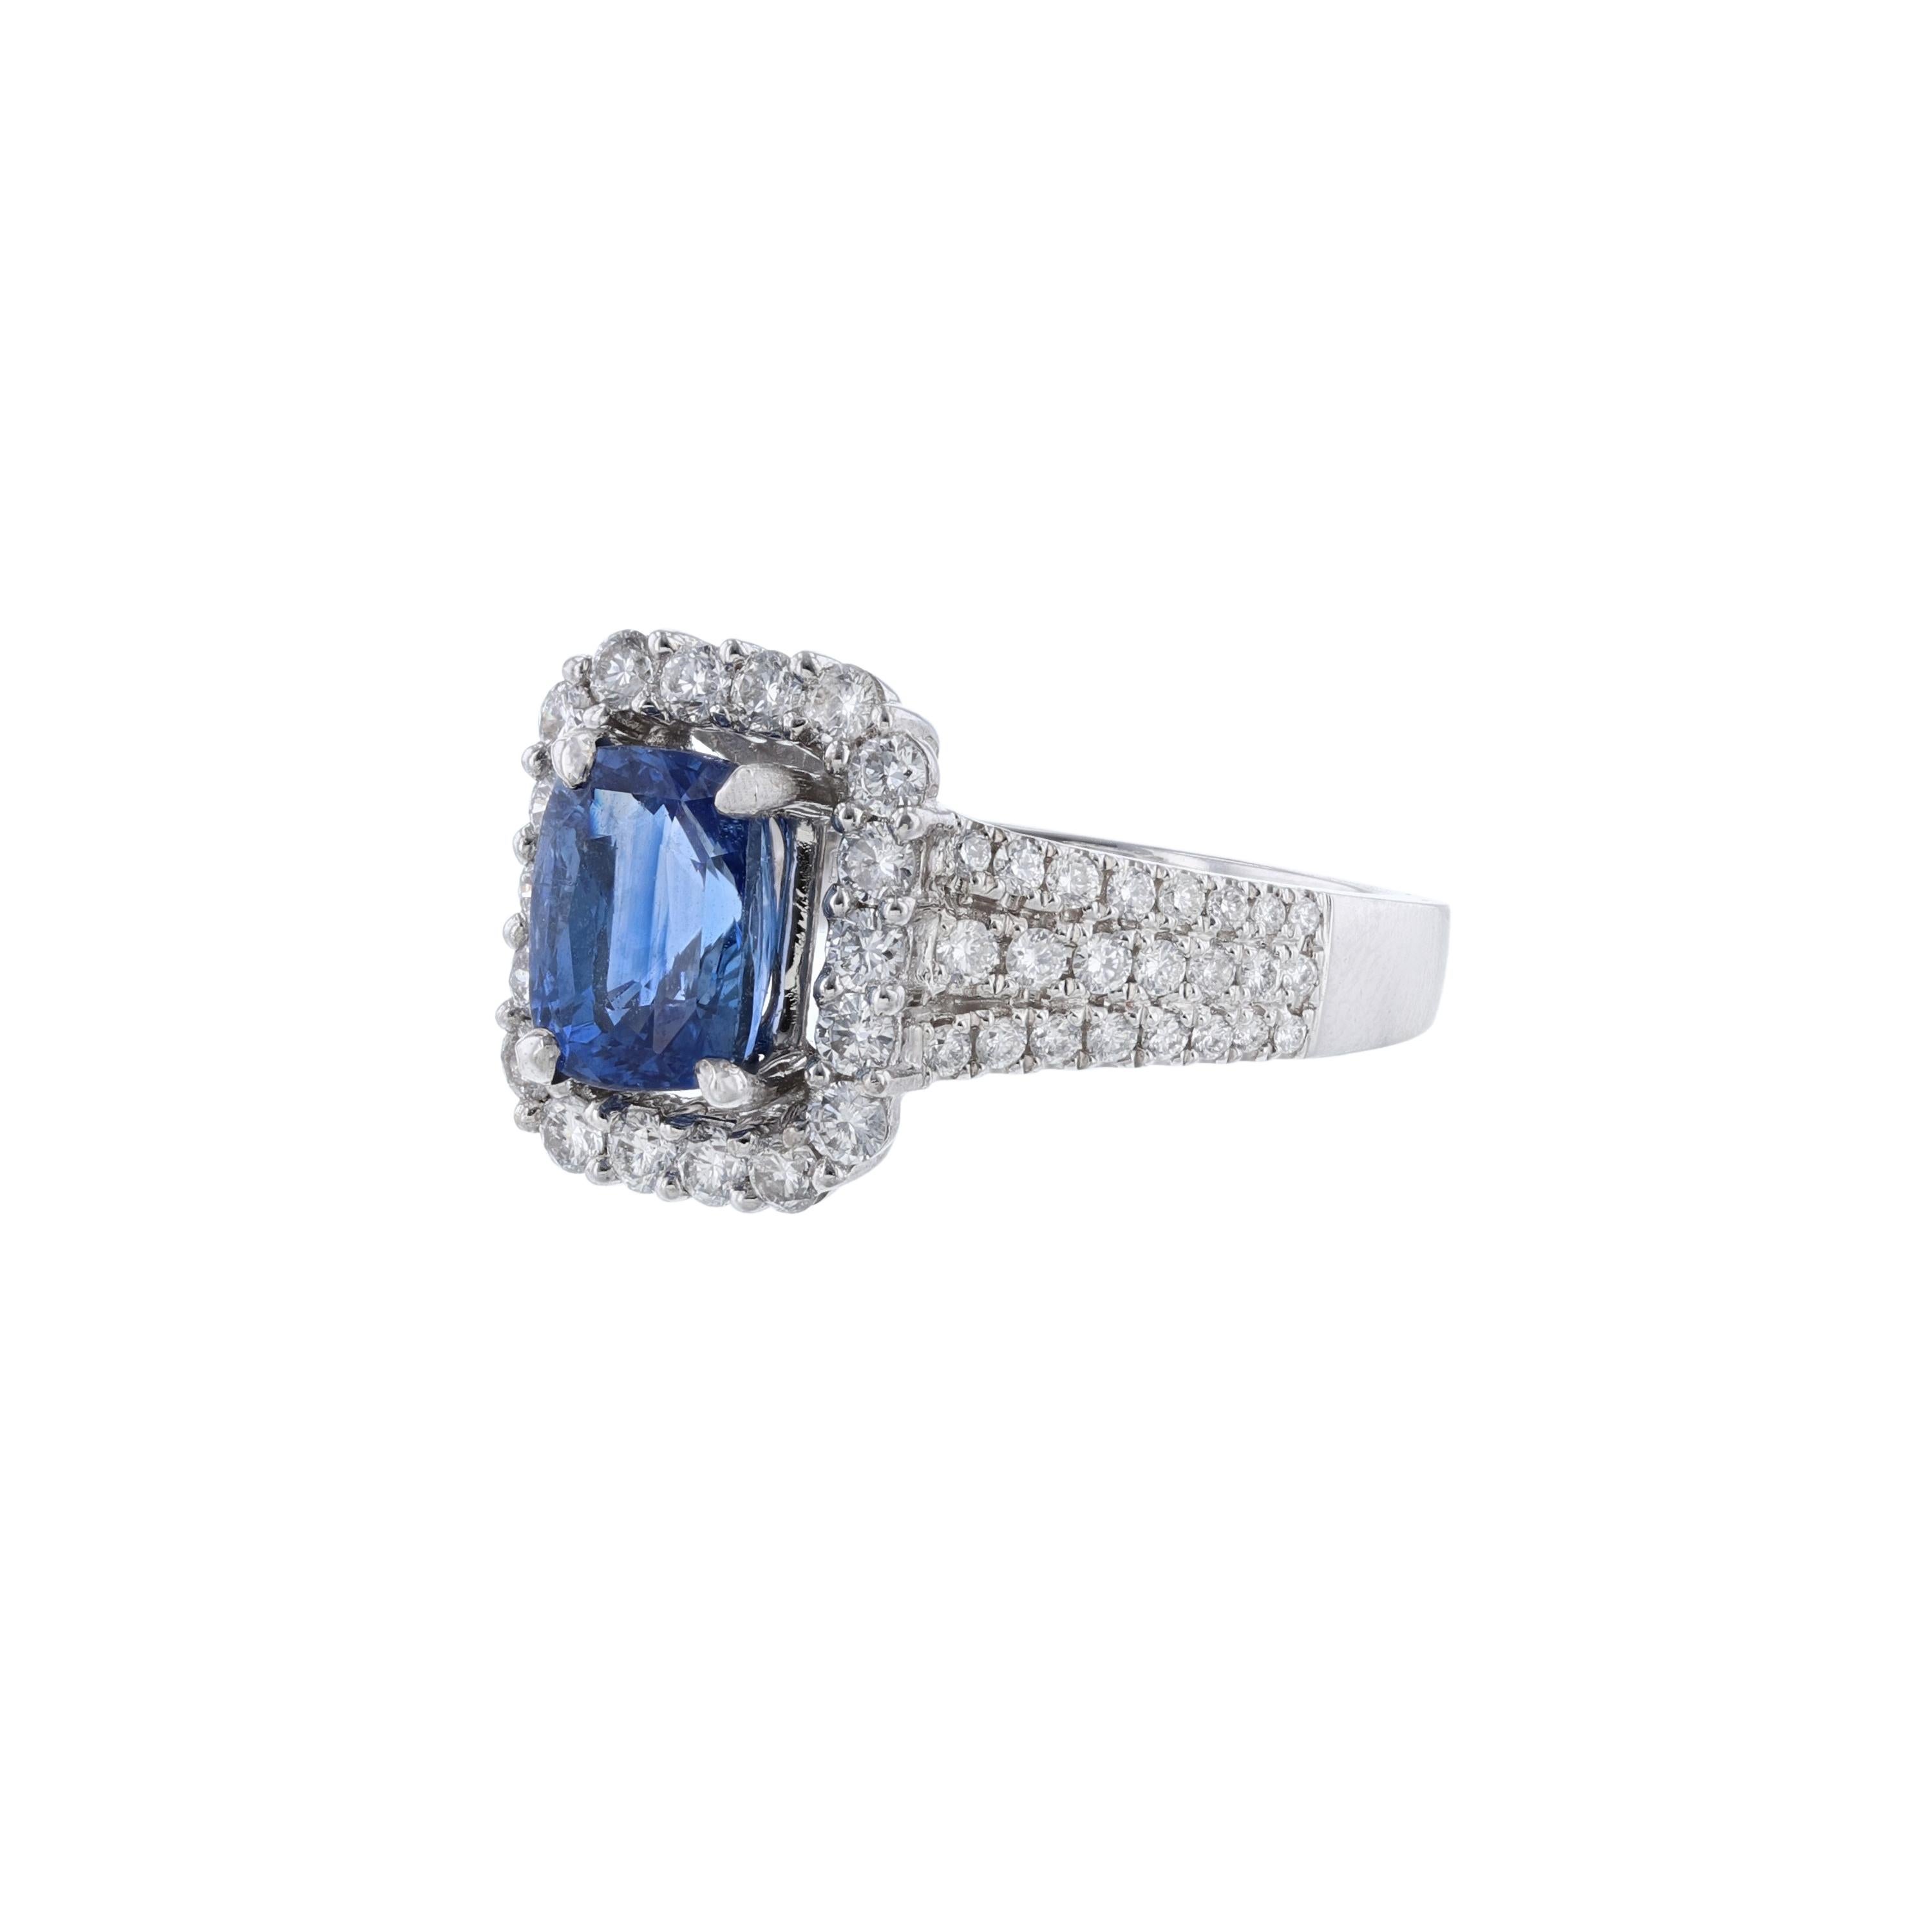 This ring is made in 18K white gold and features 1 cushion cut blue sapphire weighing 2.44 carats. Also, the ring features 64 round cut diamonds weighing 0.91 carat. With a color grade (H) and clarity grade (SI1).